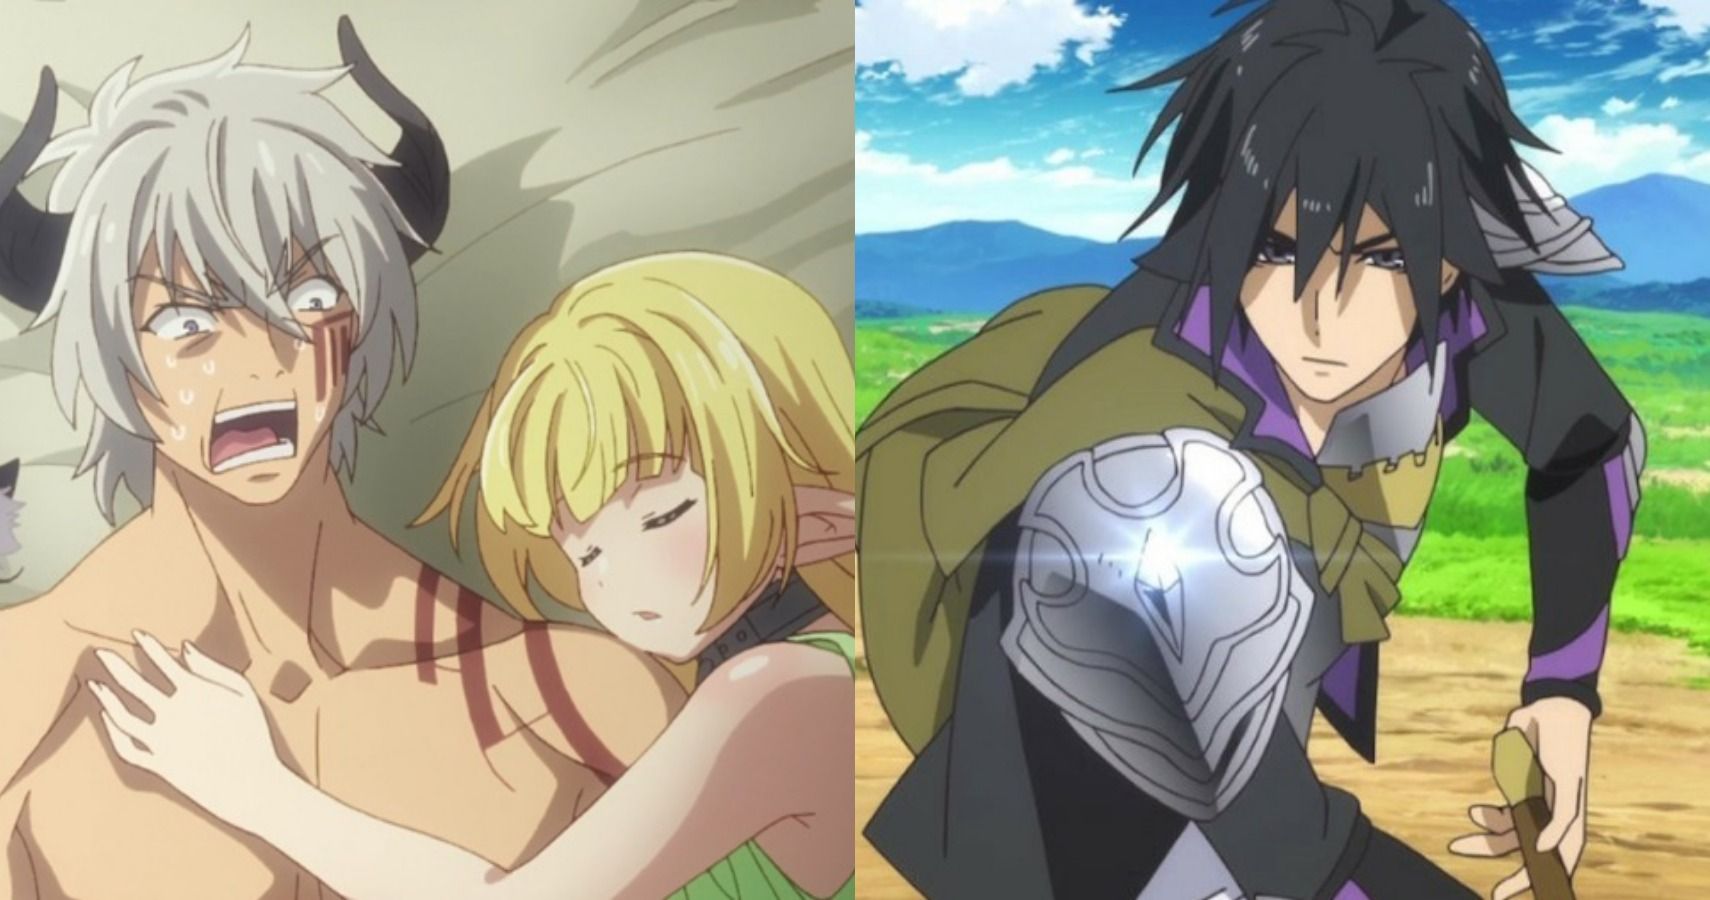 10 Worst Isekai Anime With The Best Reputations